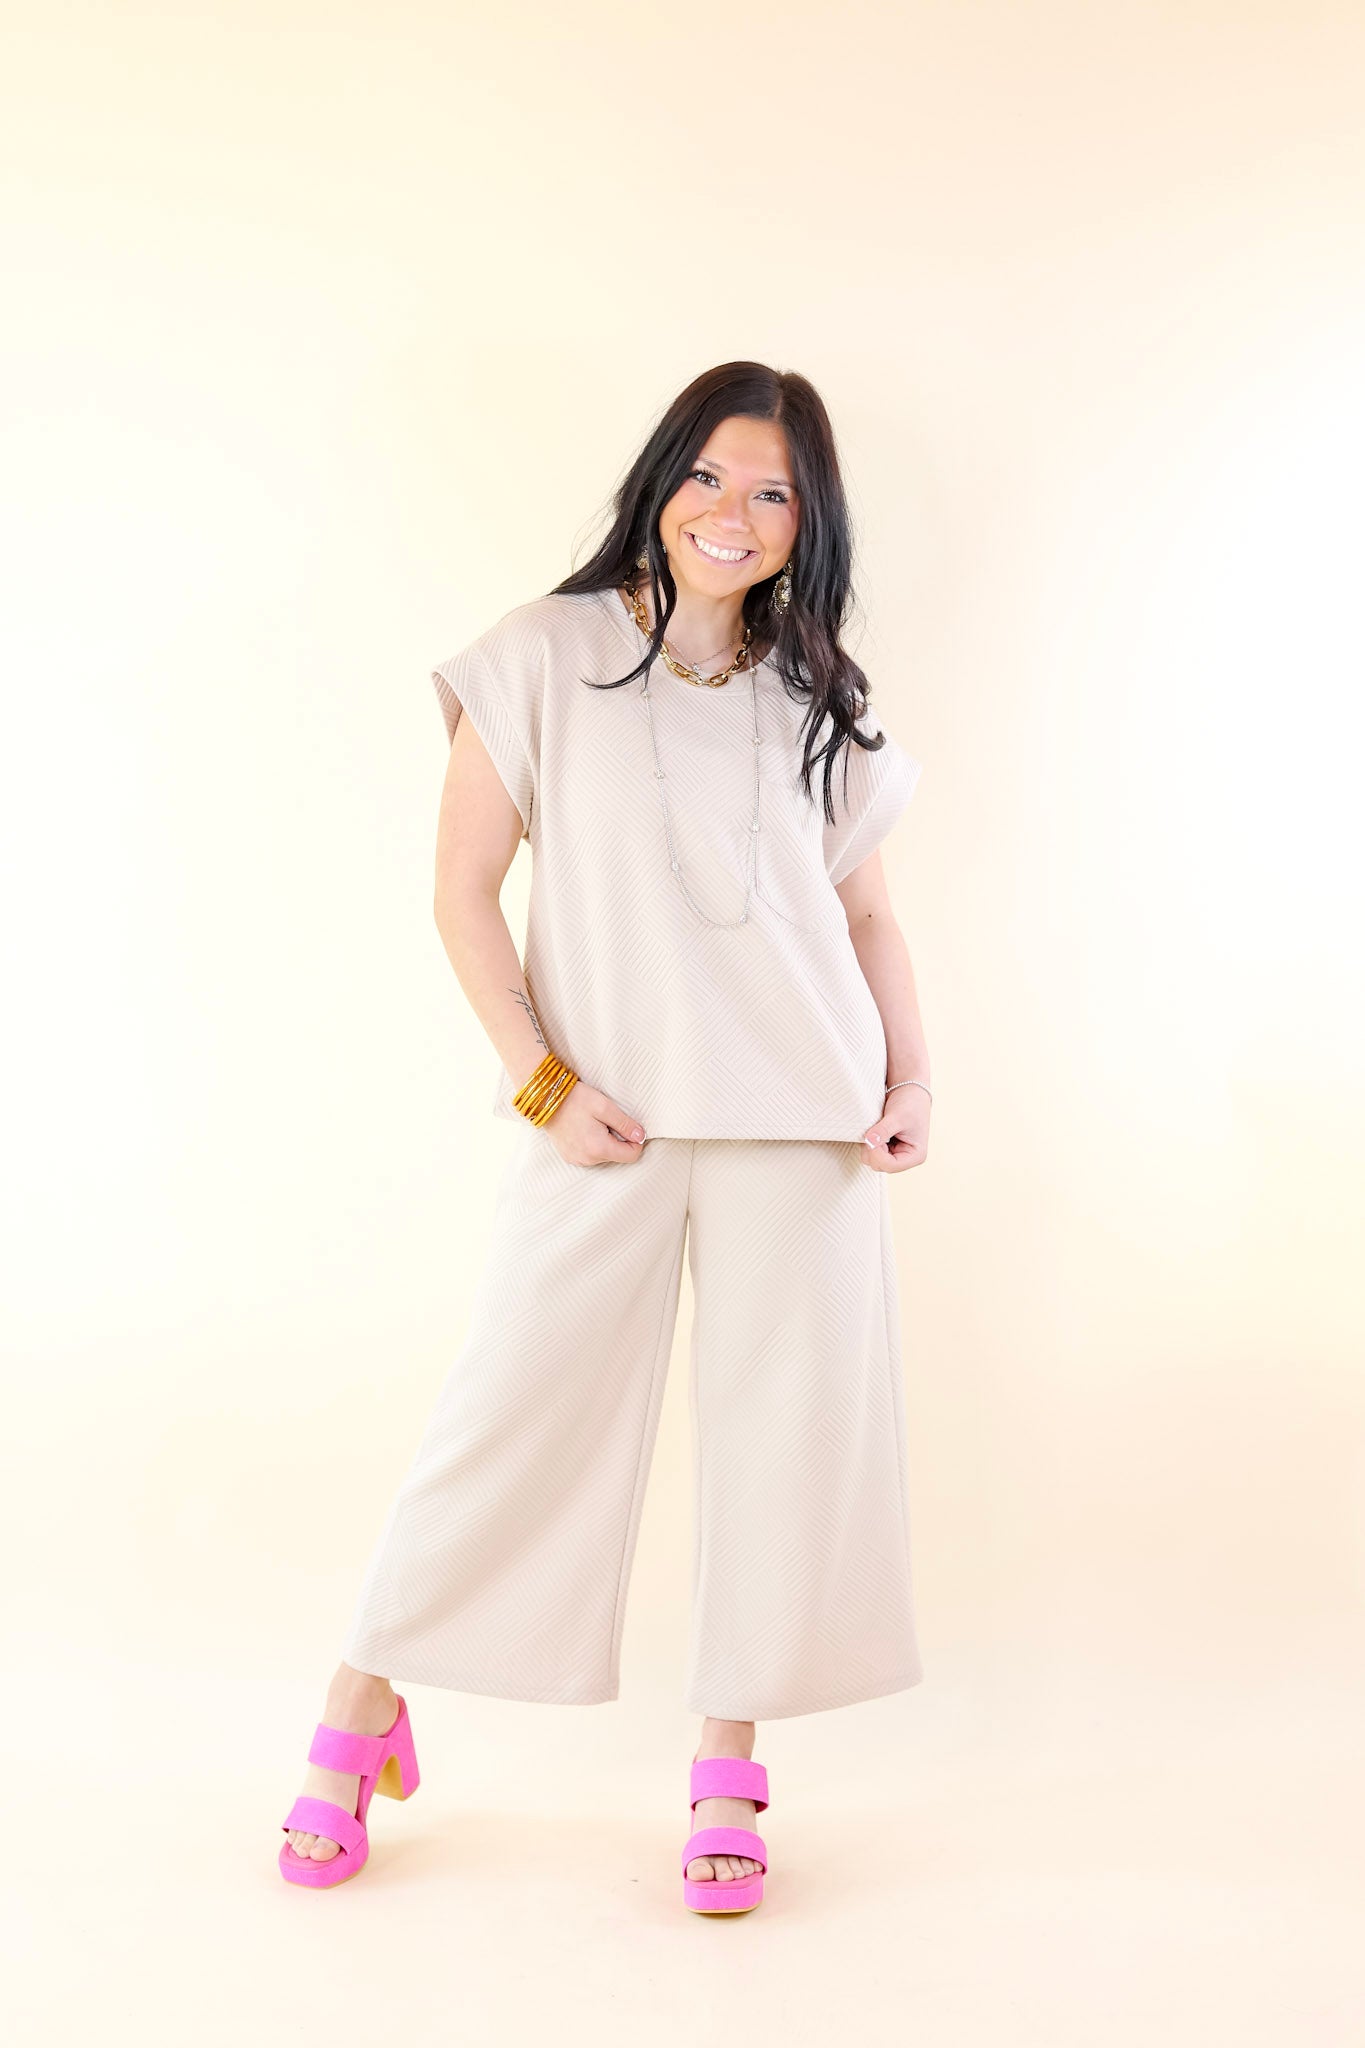 Glamour on the Go Textured Top with Pocket in Cream - Giddy Up Glamour Boutique